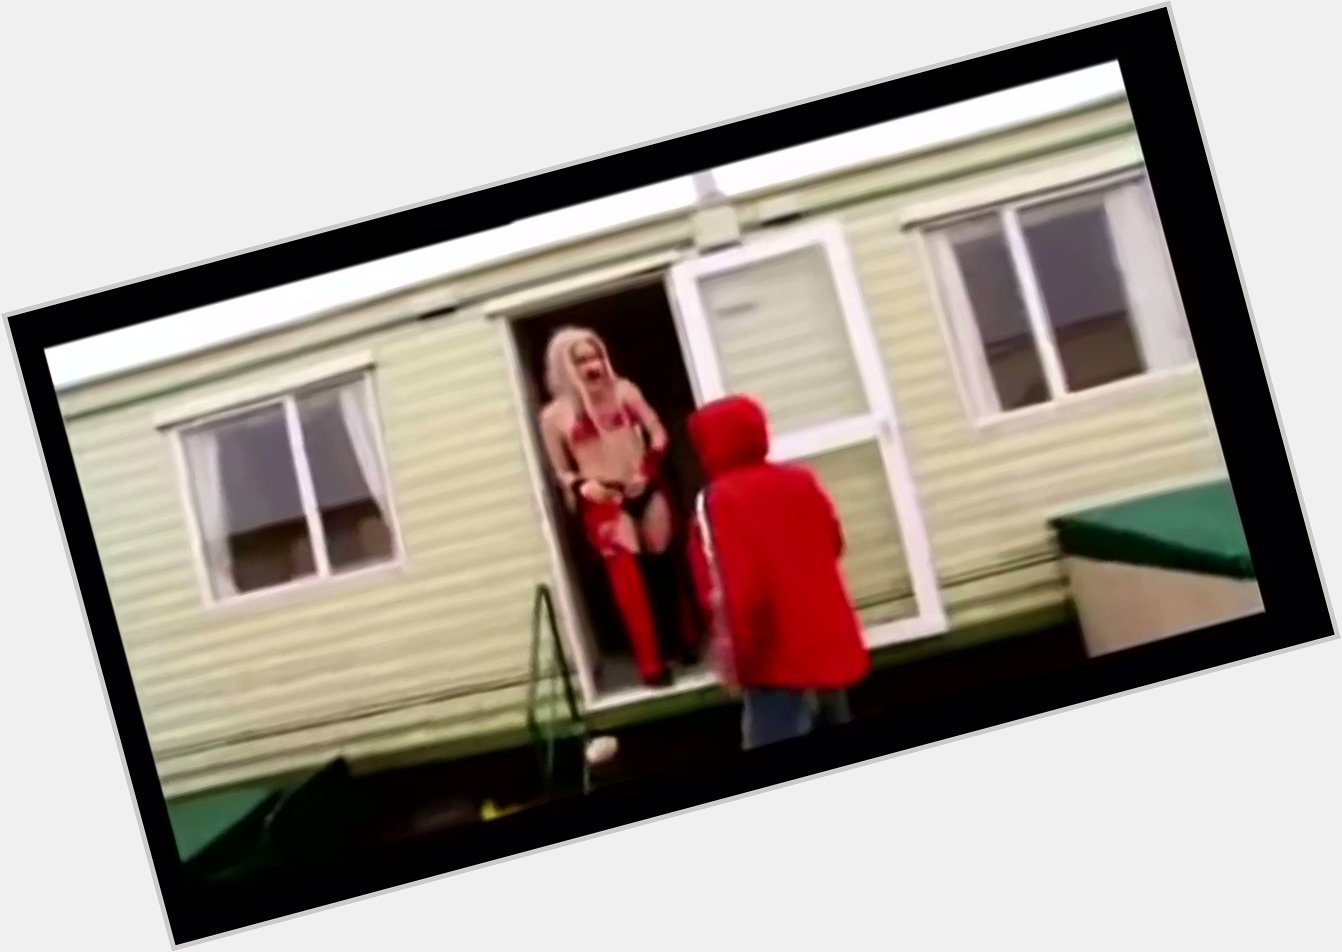 Happy birthday christina aguilera, I loved her episode of Cribs 